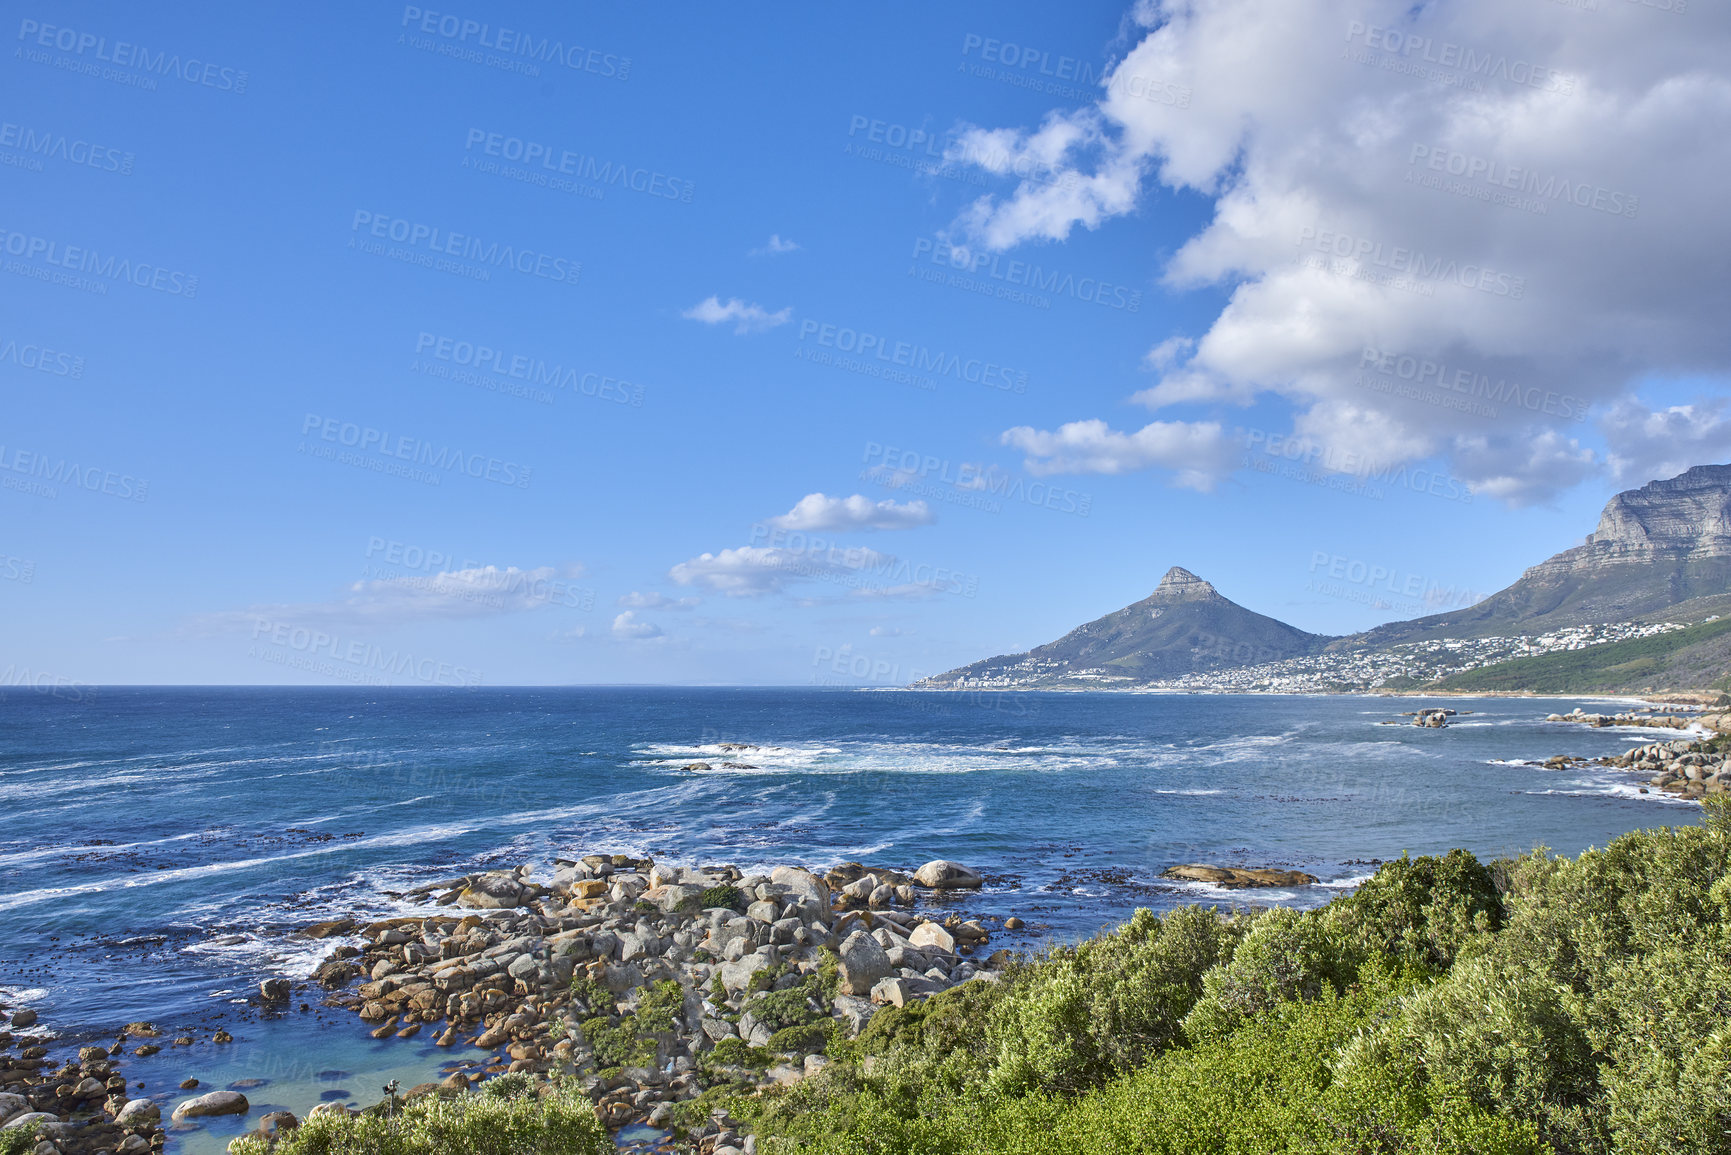 Buy stock photo A nature scenery of a calm sea and green bushes, with Lions Head mountain in the horizon, Cape Town, South Africa. Landscape of the ocean near the mountains with blue cloud sky and copy space.